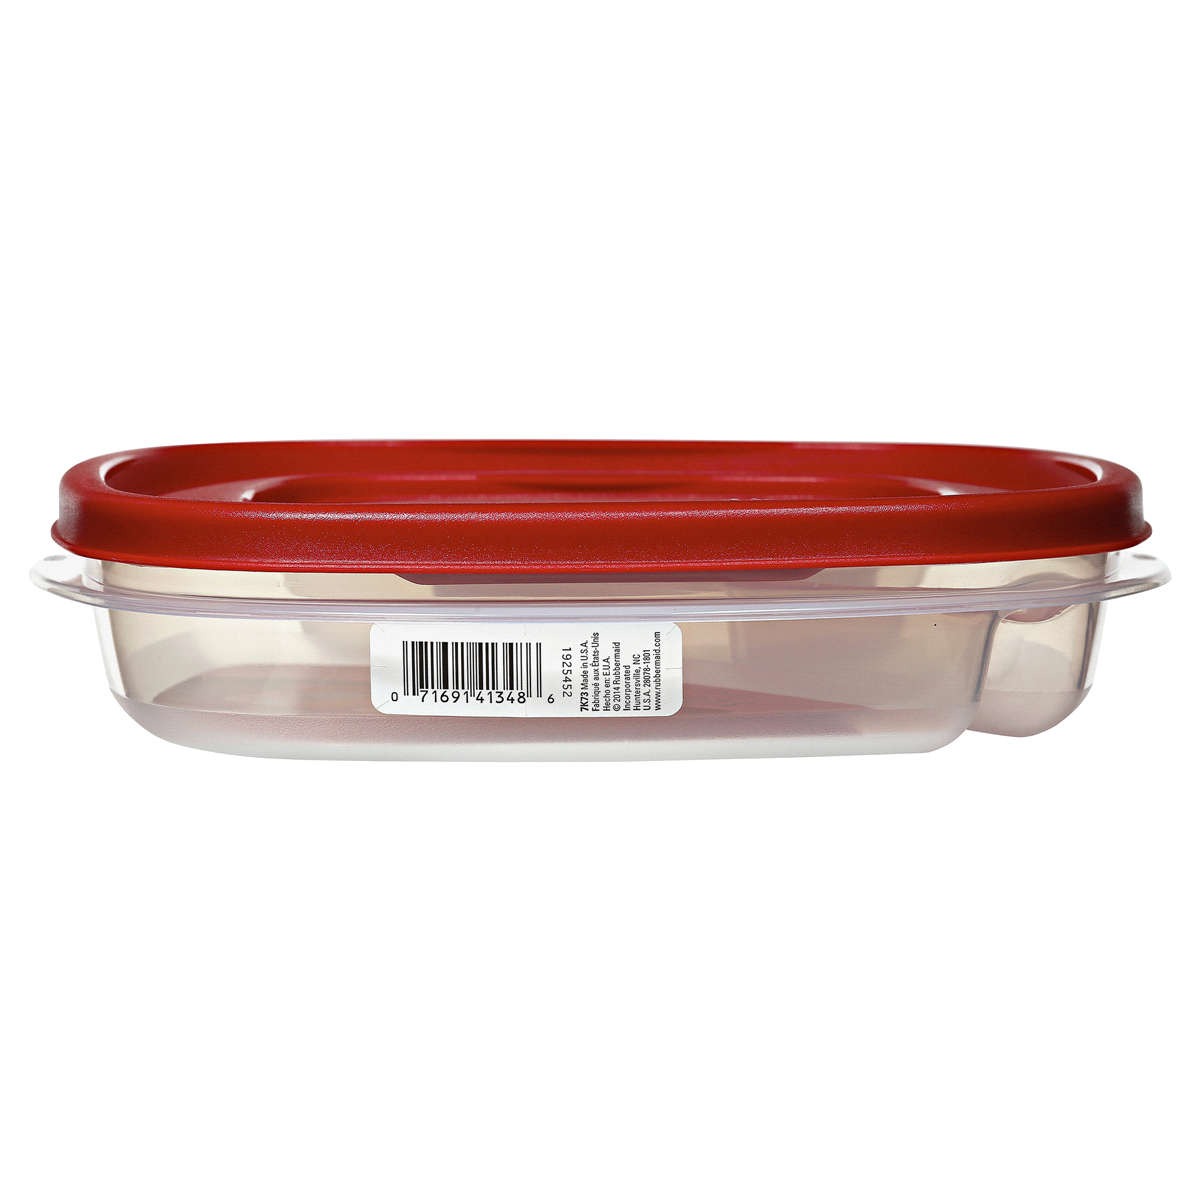 Rubbermaid Premier Divided Food Storage Container 